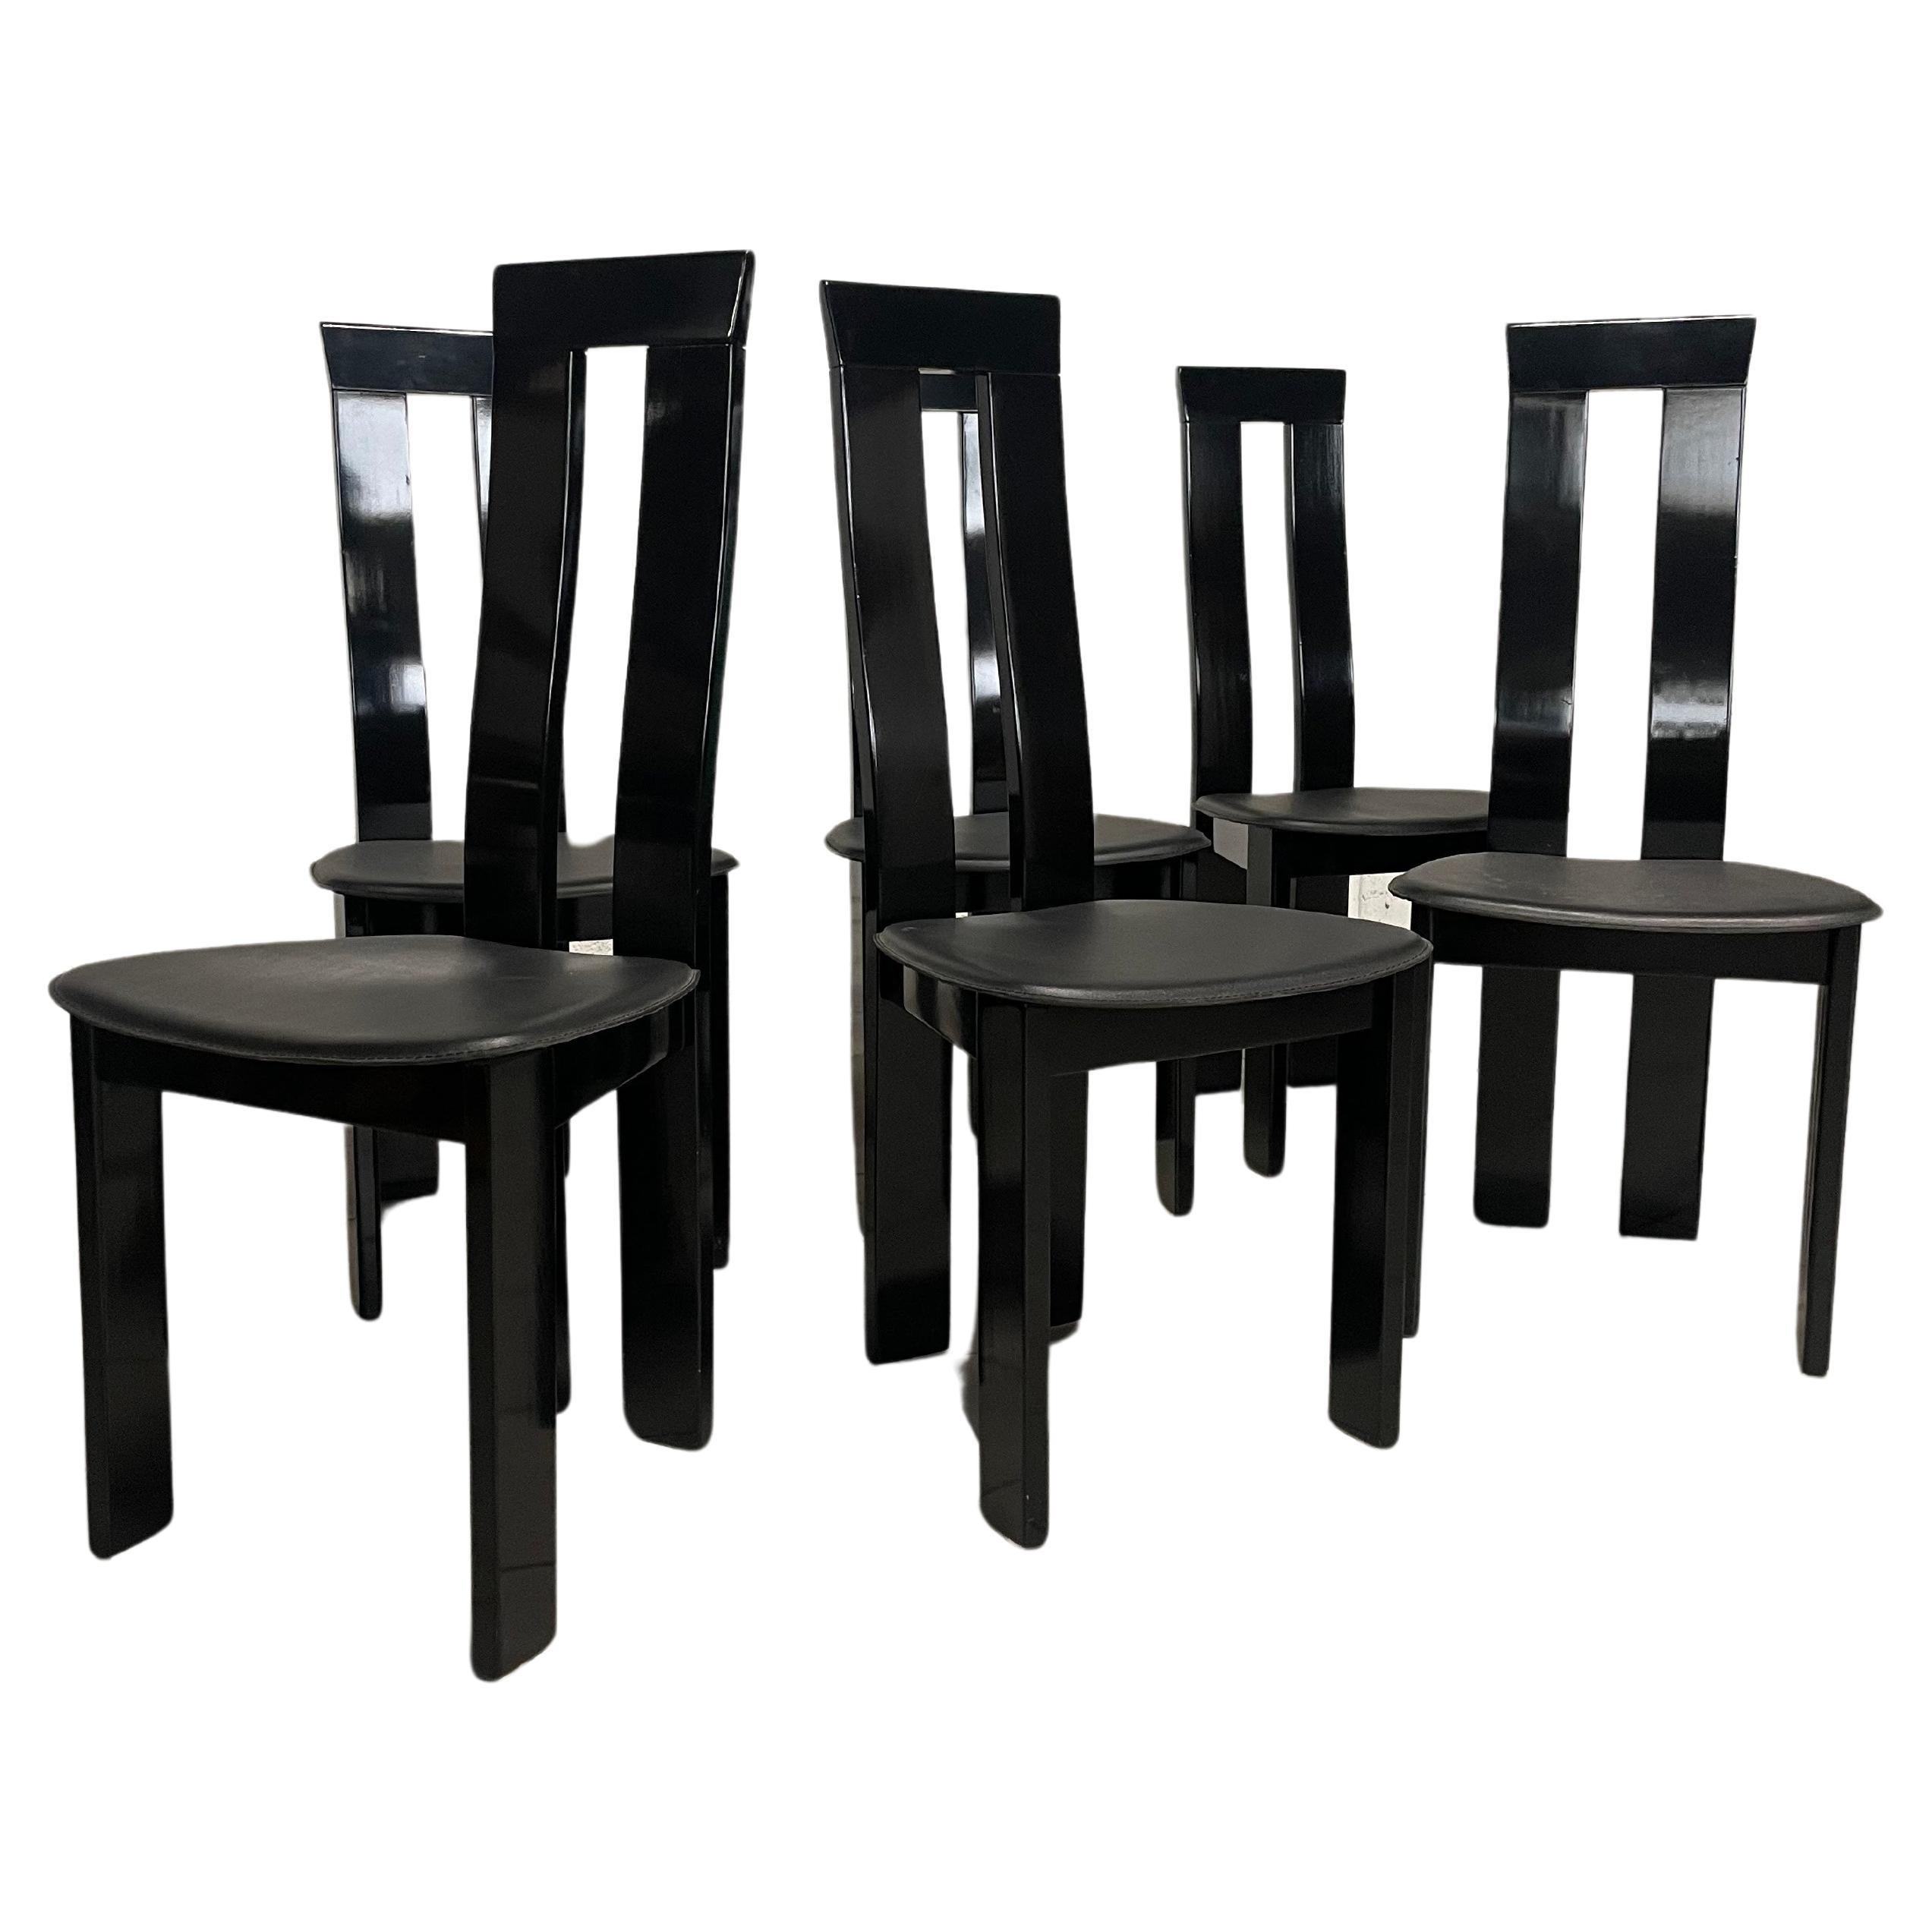 Set of 6 chairs from the 1970s in the style of Pietro Costantini For Sale